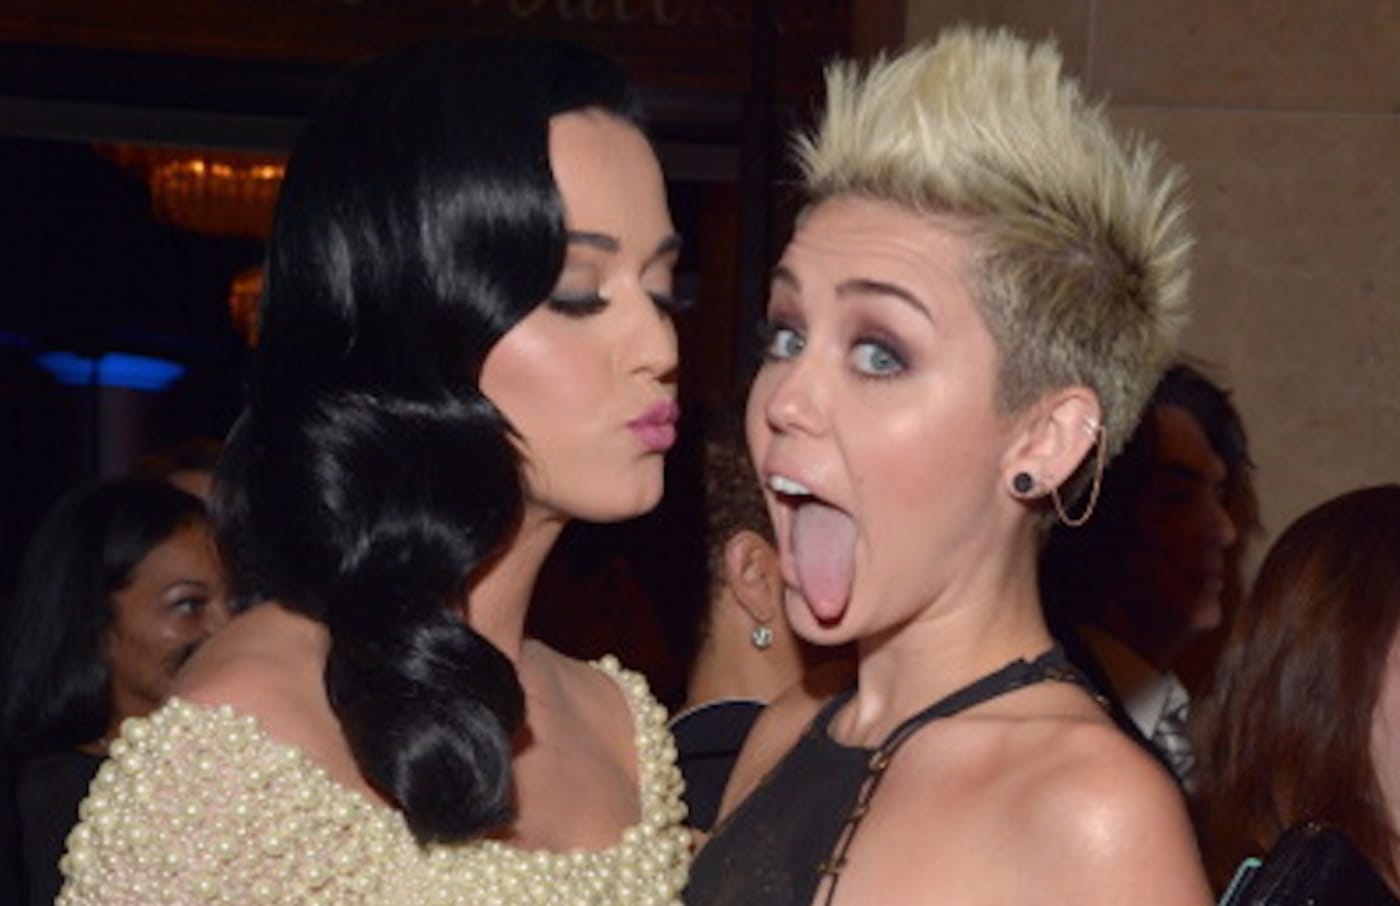 Katy Perry (L) and Miley Cyrus arrive at the 55th Annual GRAMMY Awards